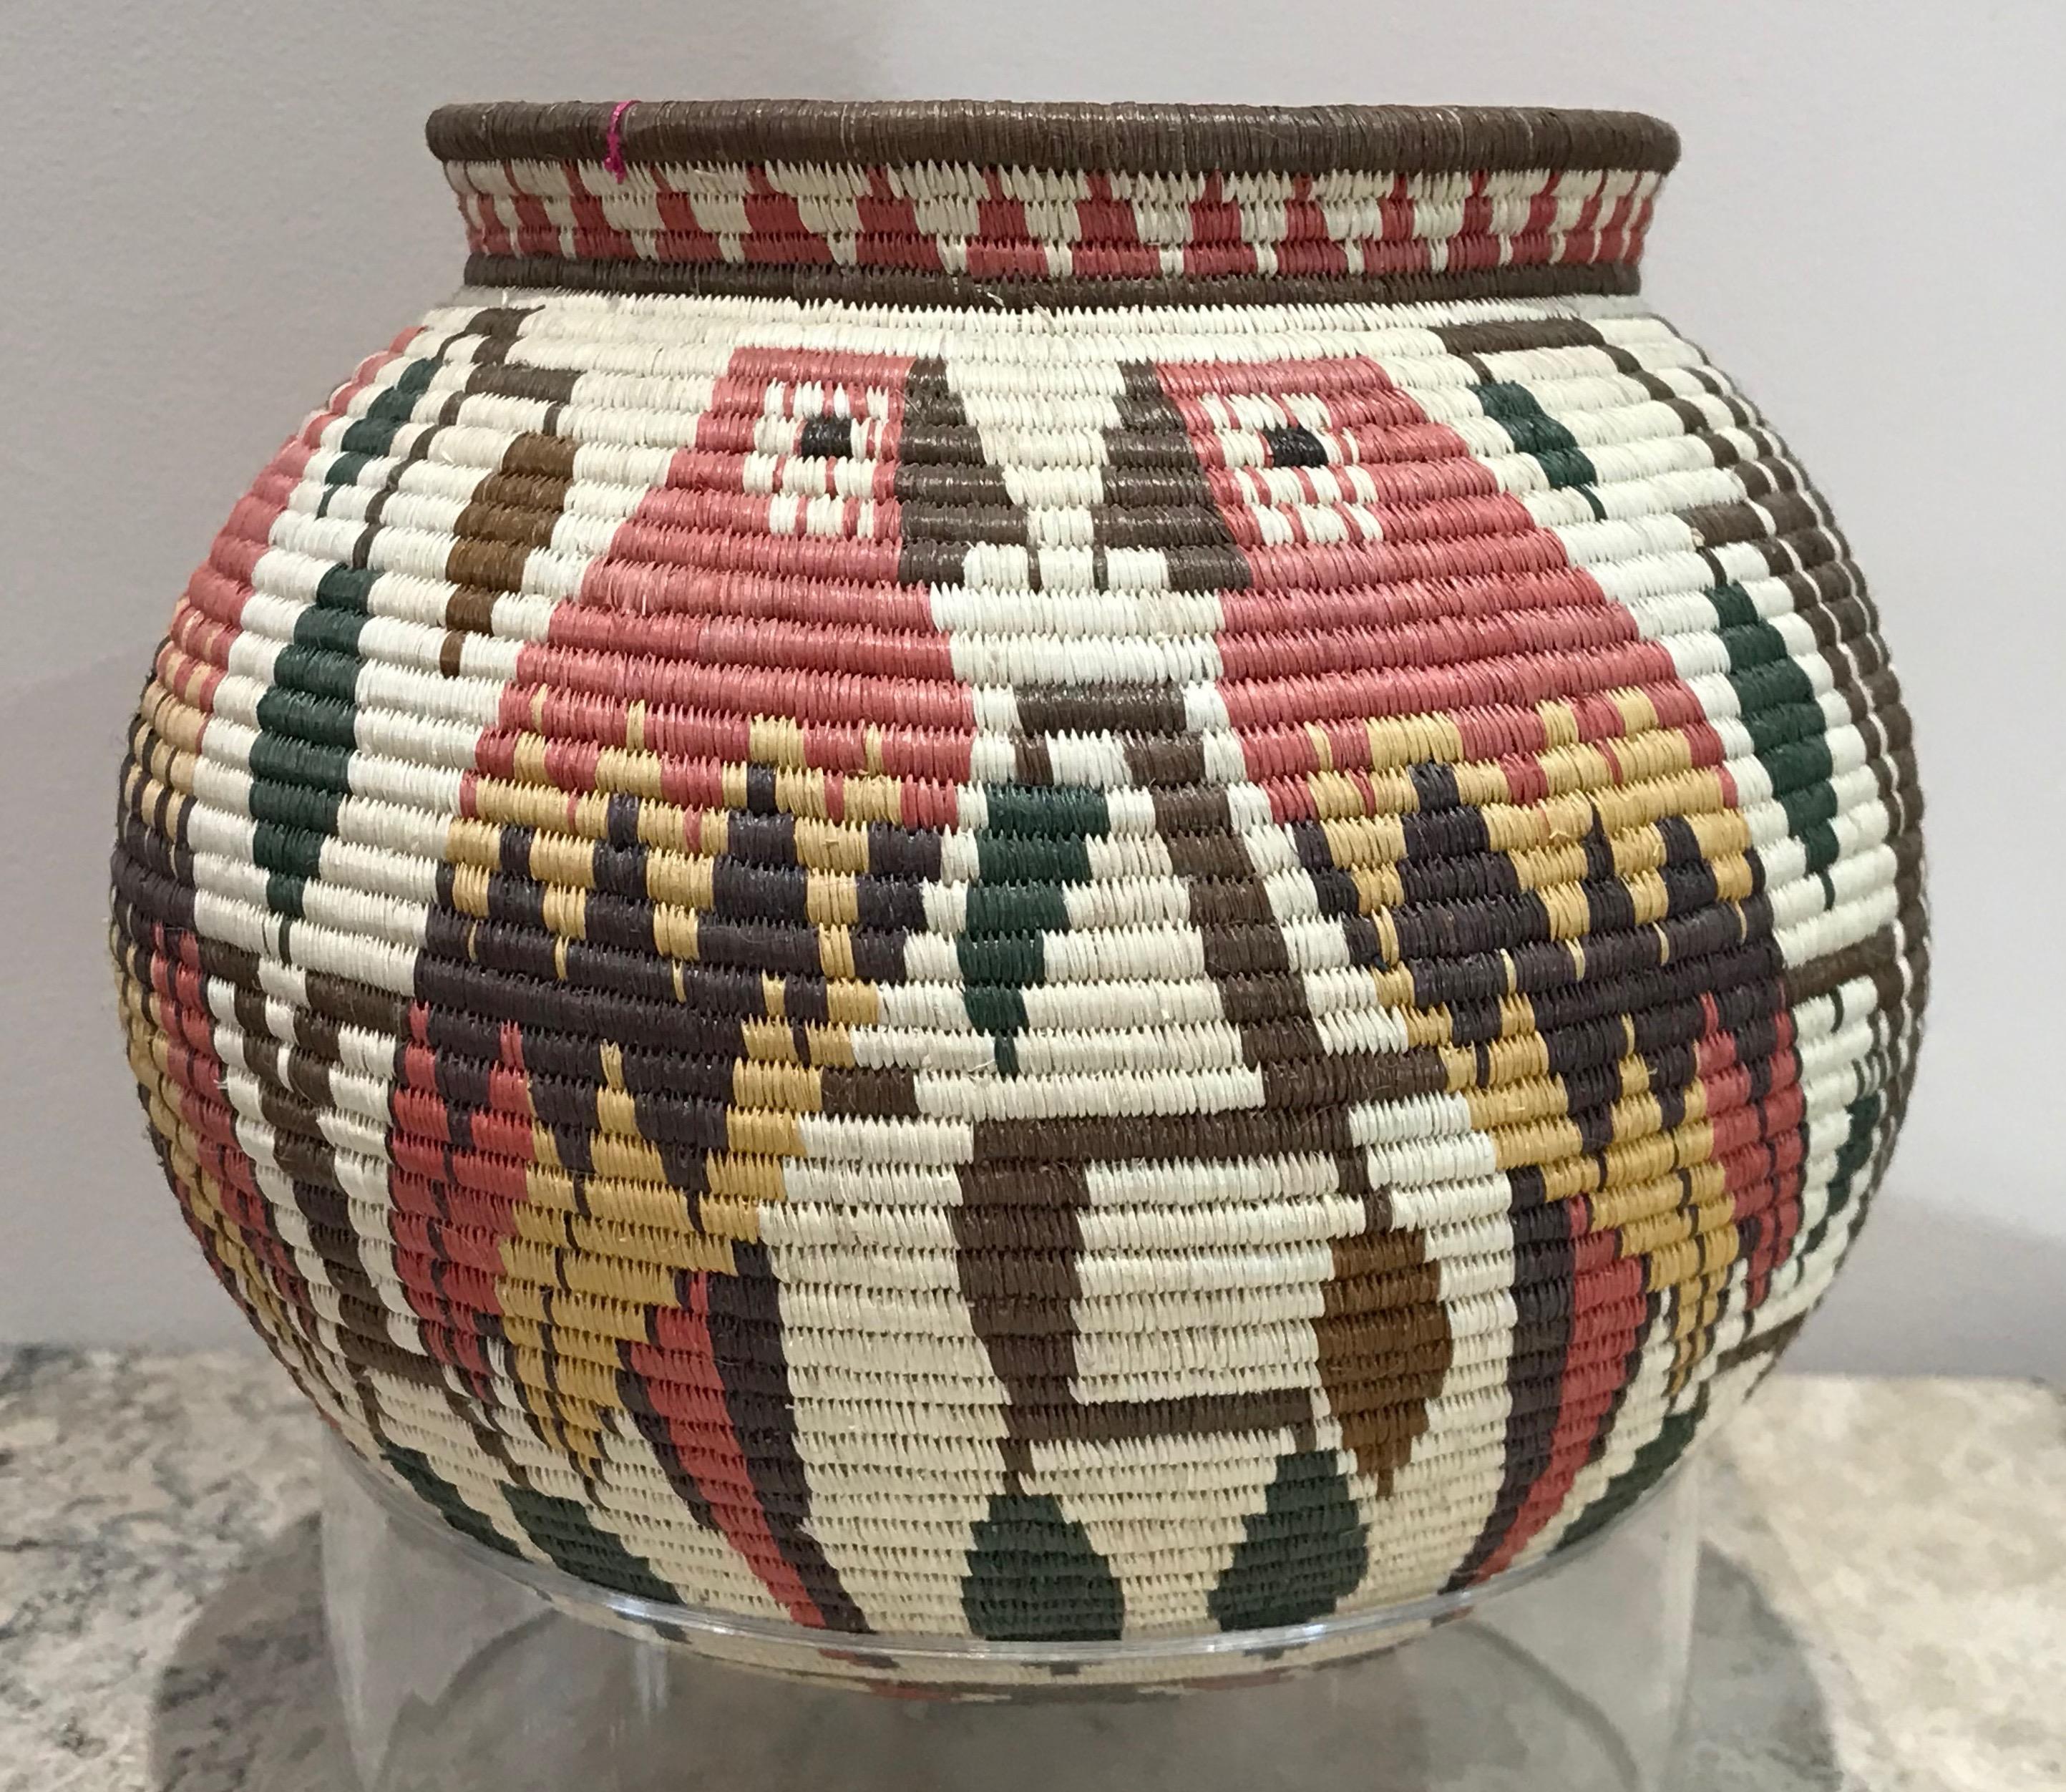 Parrot basket, Wounaan Tribe Darien Rainforest Panama, red, yellow, black, white - Art by Unknown